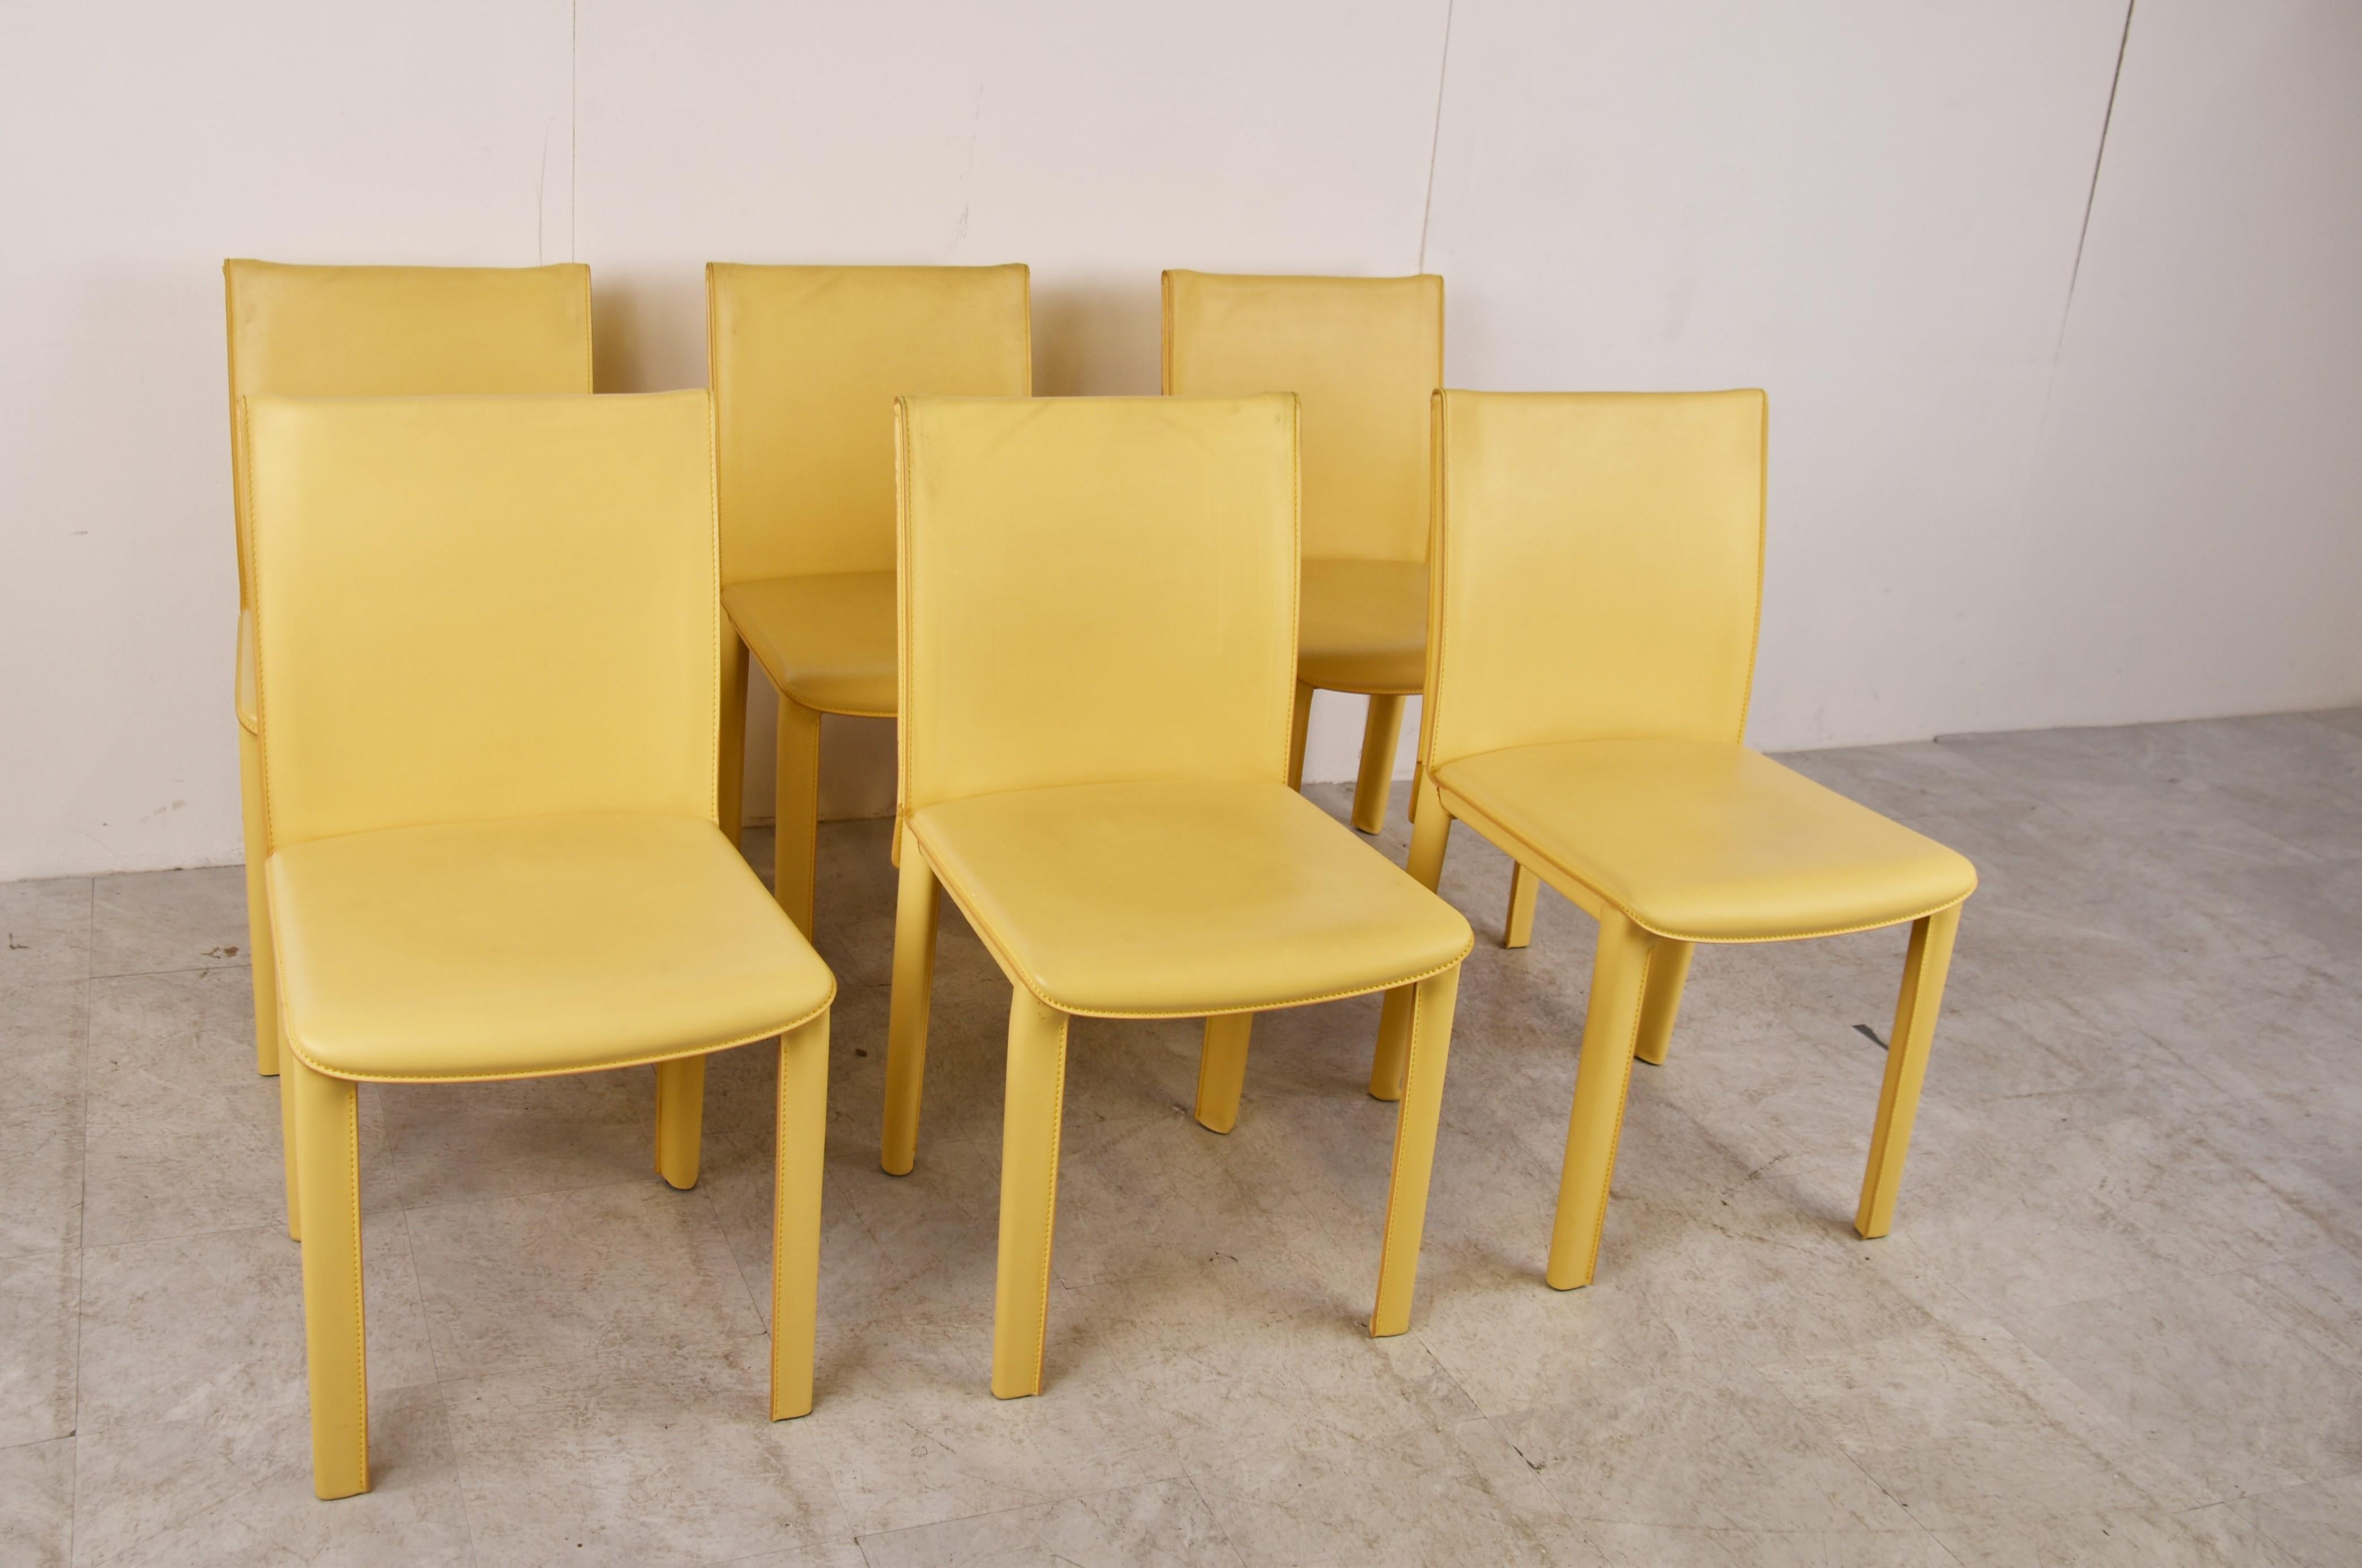 Italian Vintage Yellow Leather Dining Chairs by Arper Italy, 1980s